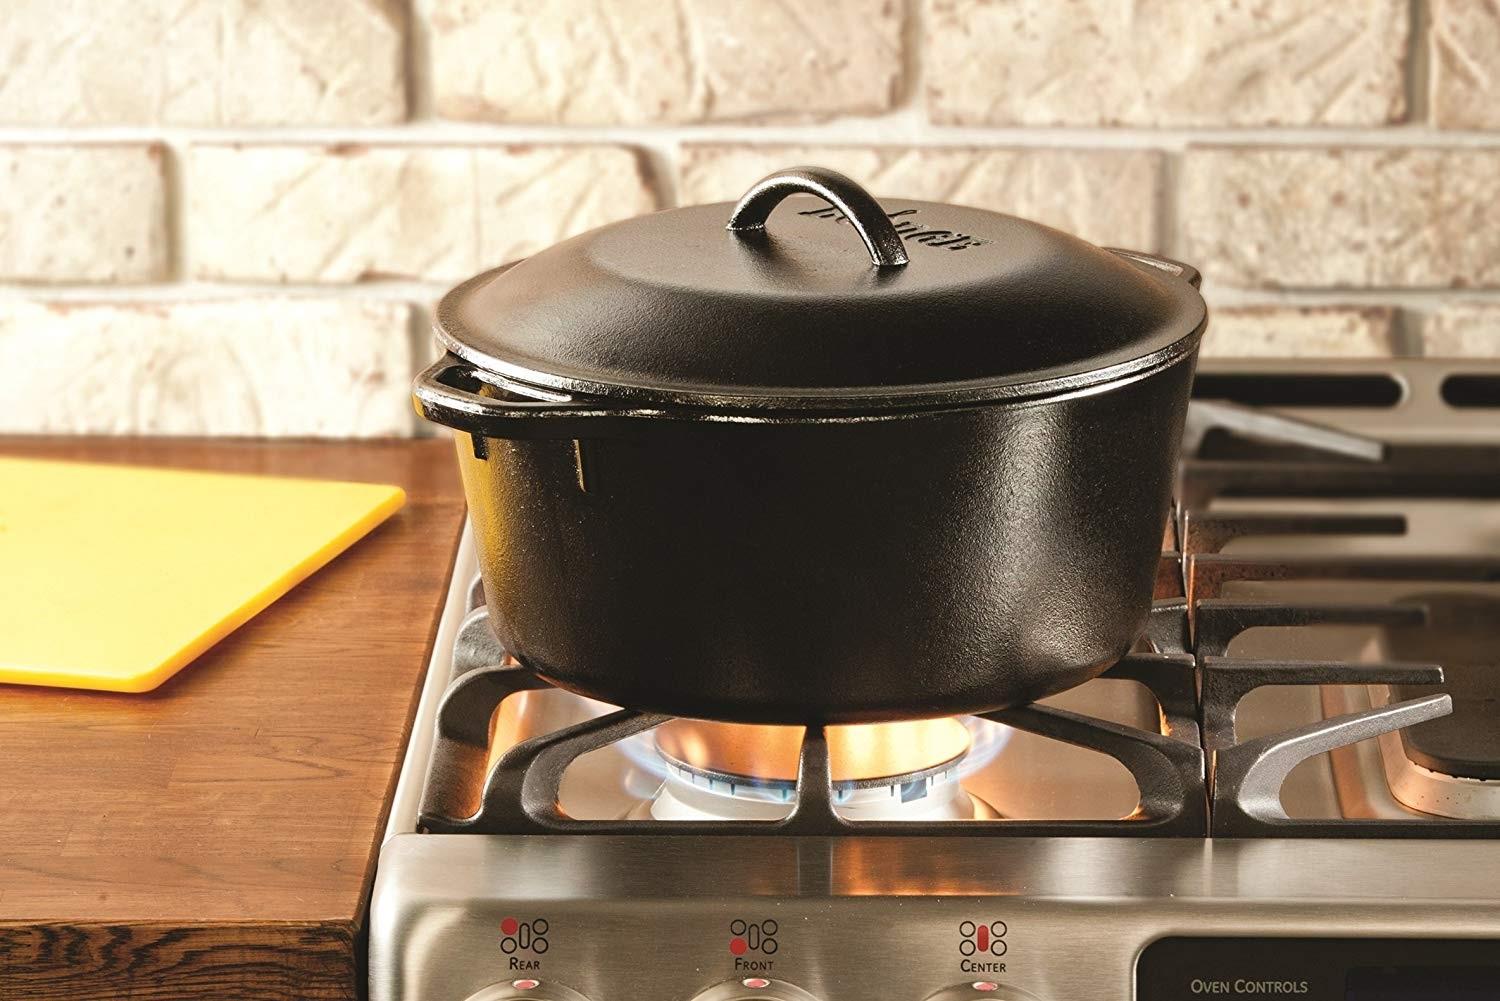 Lodge makes some of the best cast iron Dutch ovens, now starting